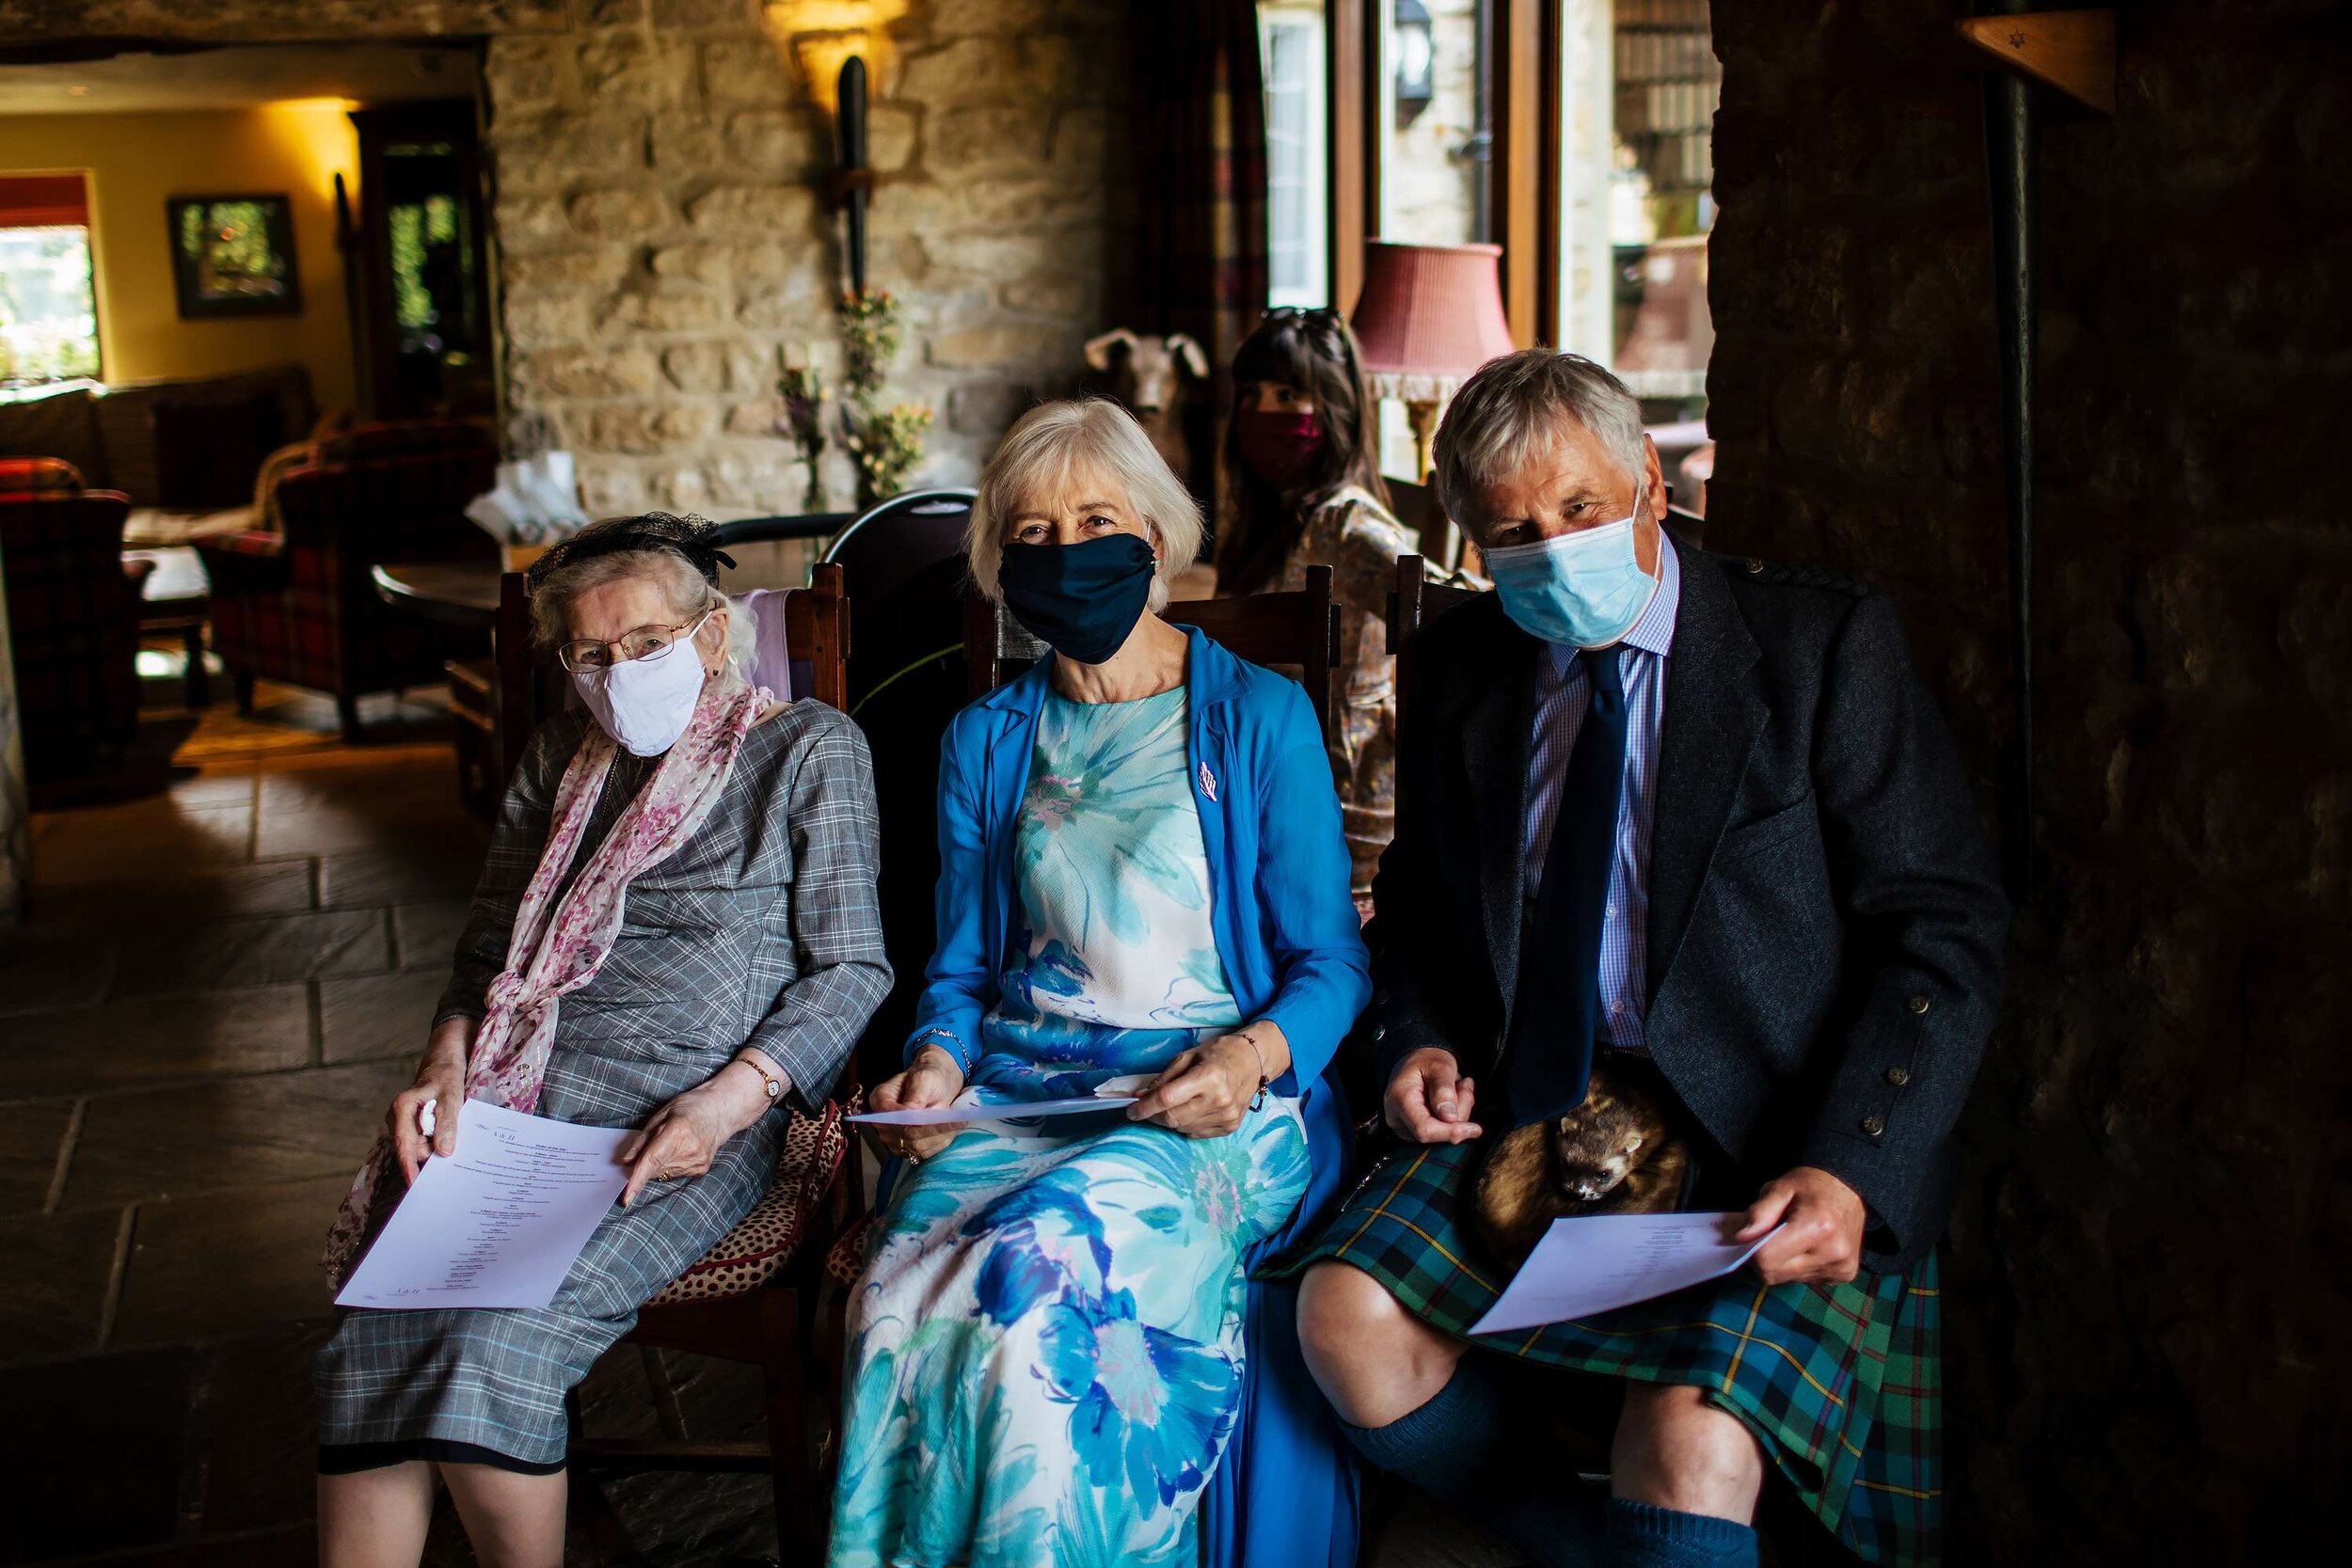 Wedding guests in face masks at The Star Inn Harome